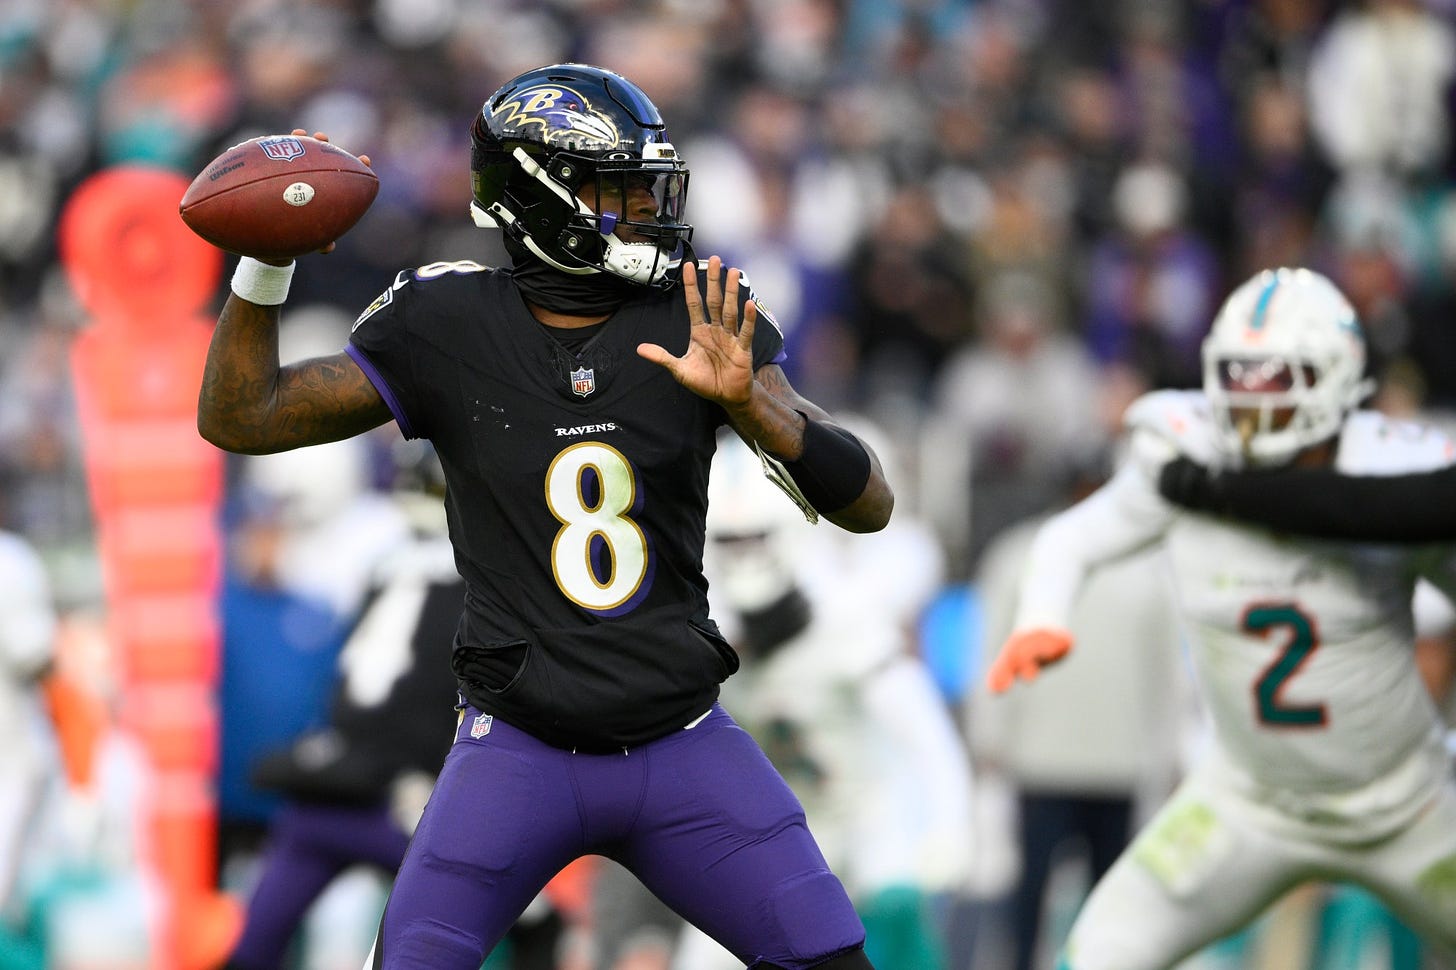 Lamar Jackson's perfect passer rating helps Ravens rout Dolphins 56-19 to  clinch top seed in AFC – CBS17.com